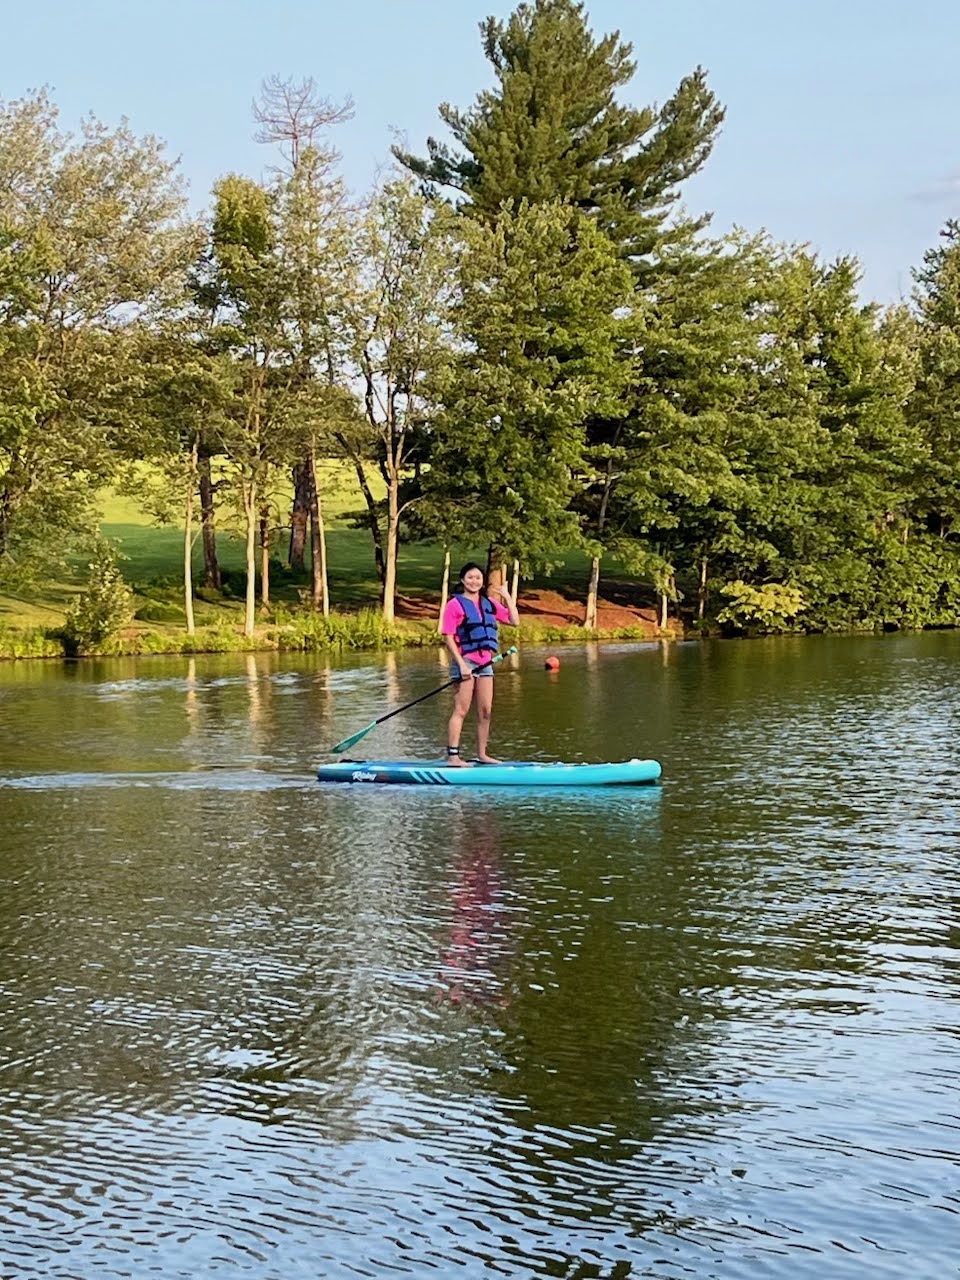 Girl stands on stand up paddleboard on lake